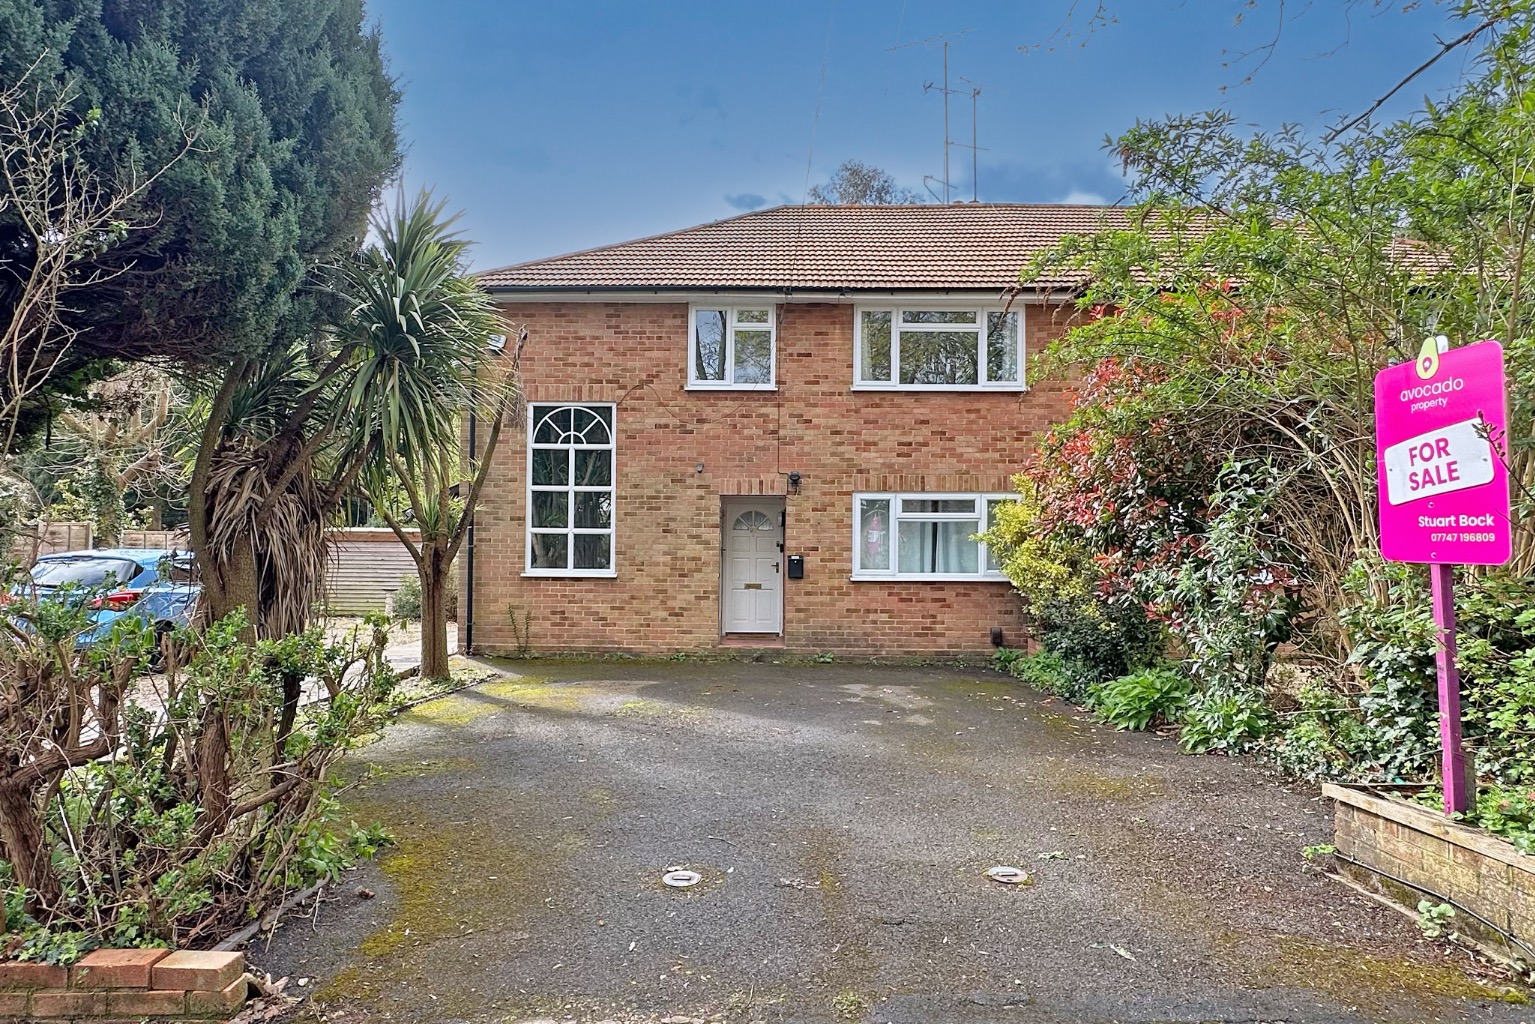 2 bed ground floor maisonette for sale in Ray Mill Road East, Maidenhead  - Property Image 1